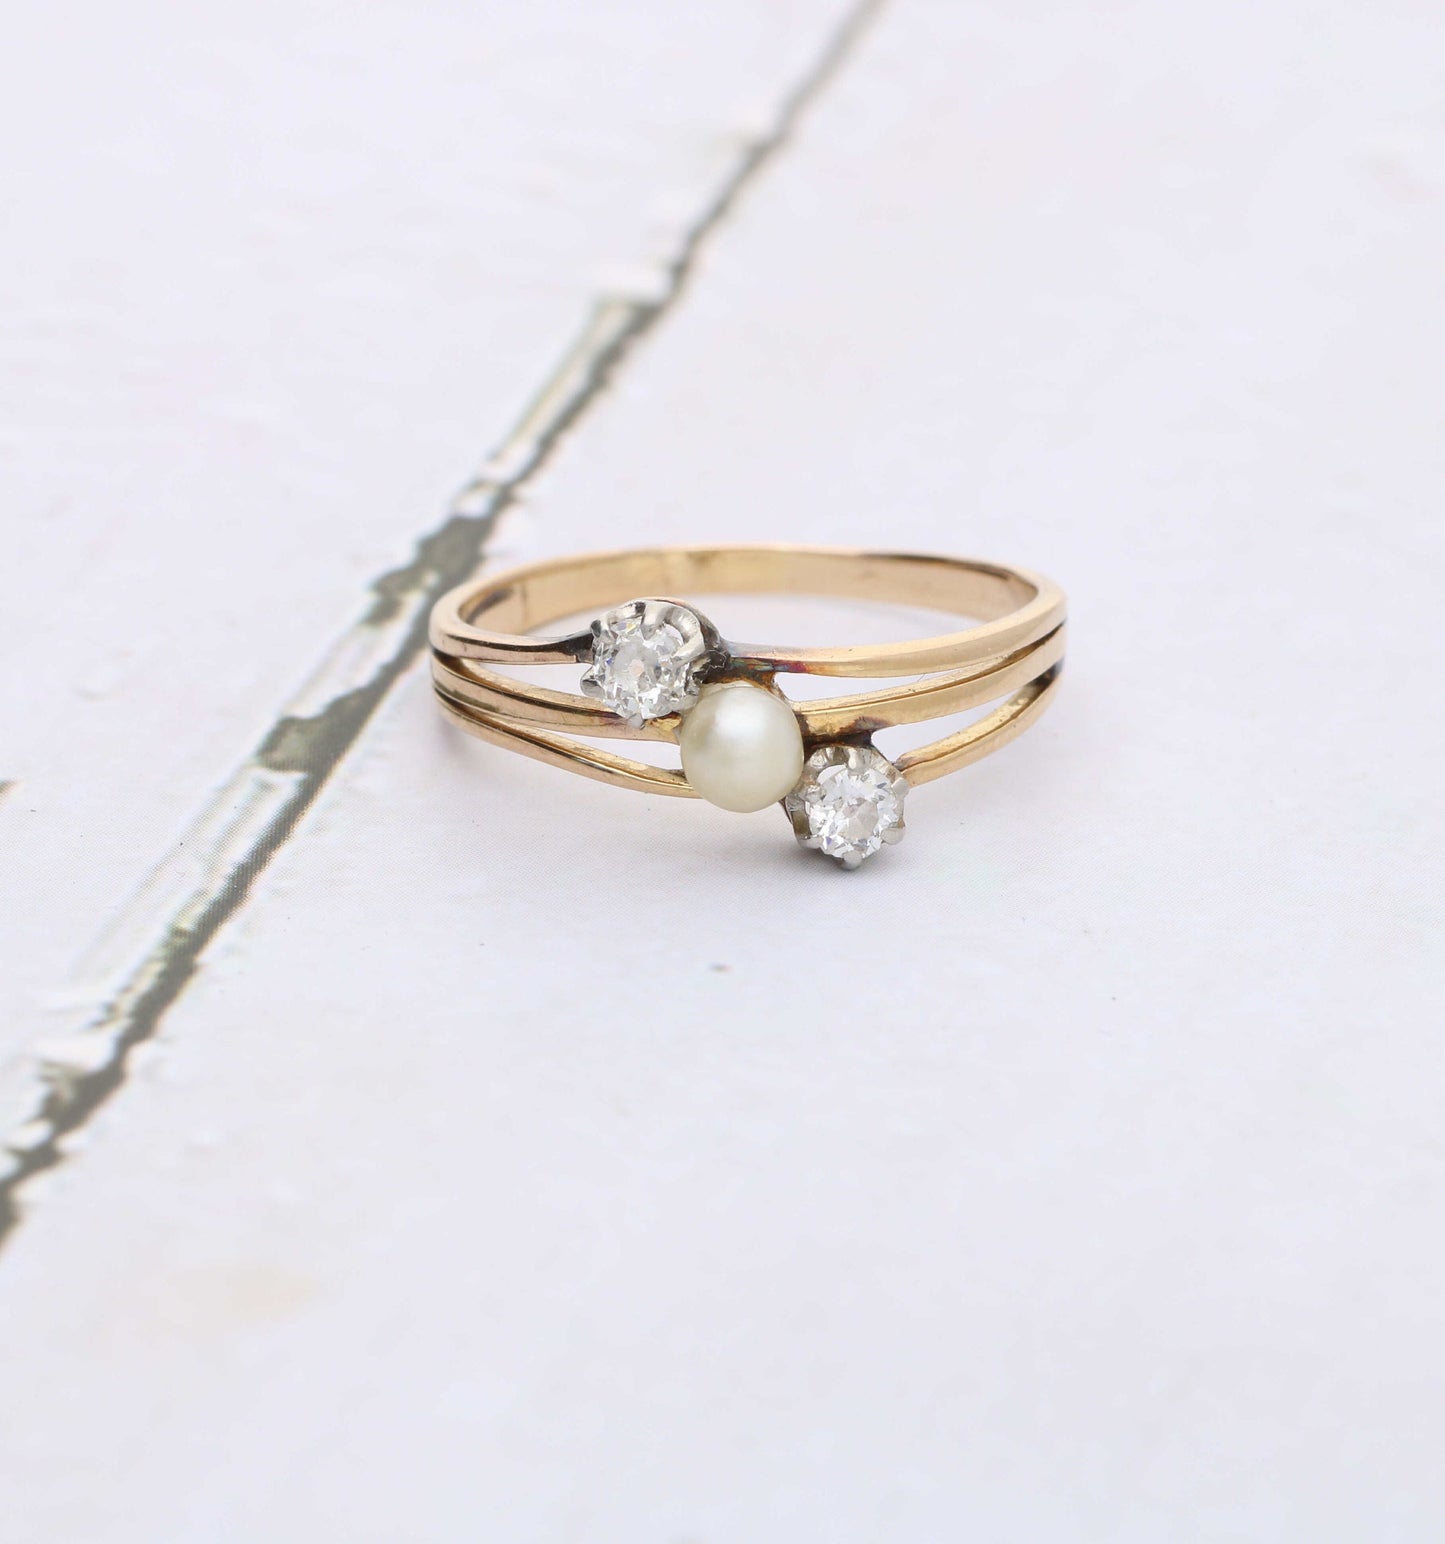 Antique pearl and old cut diamond ring